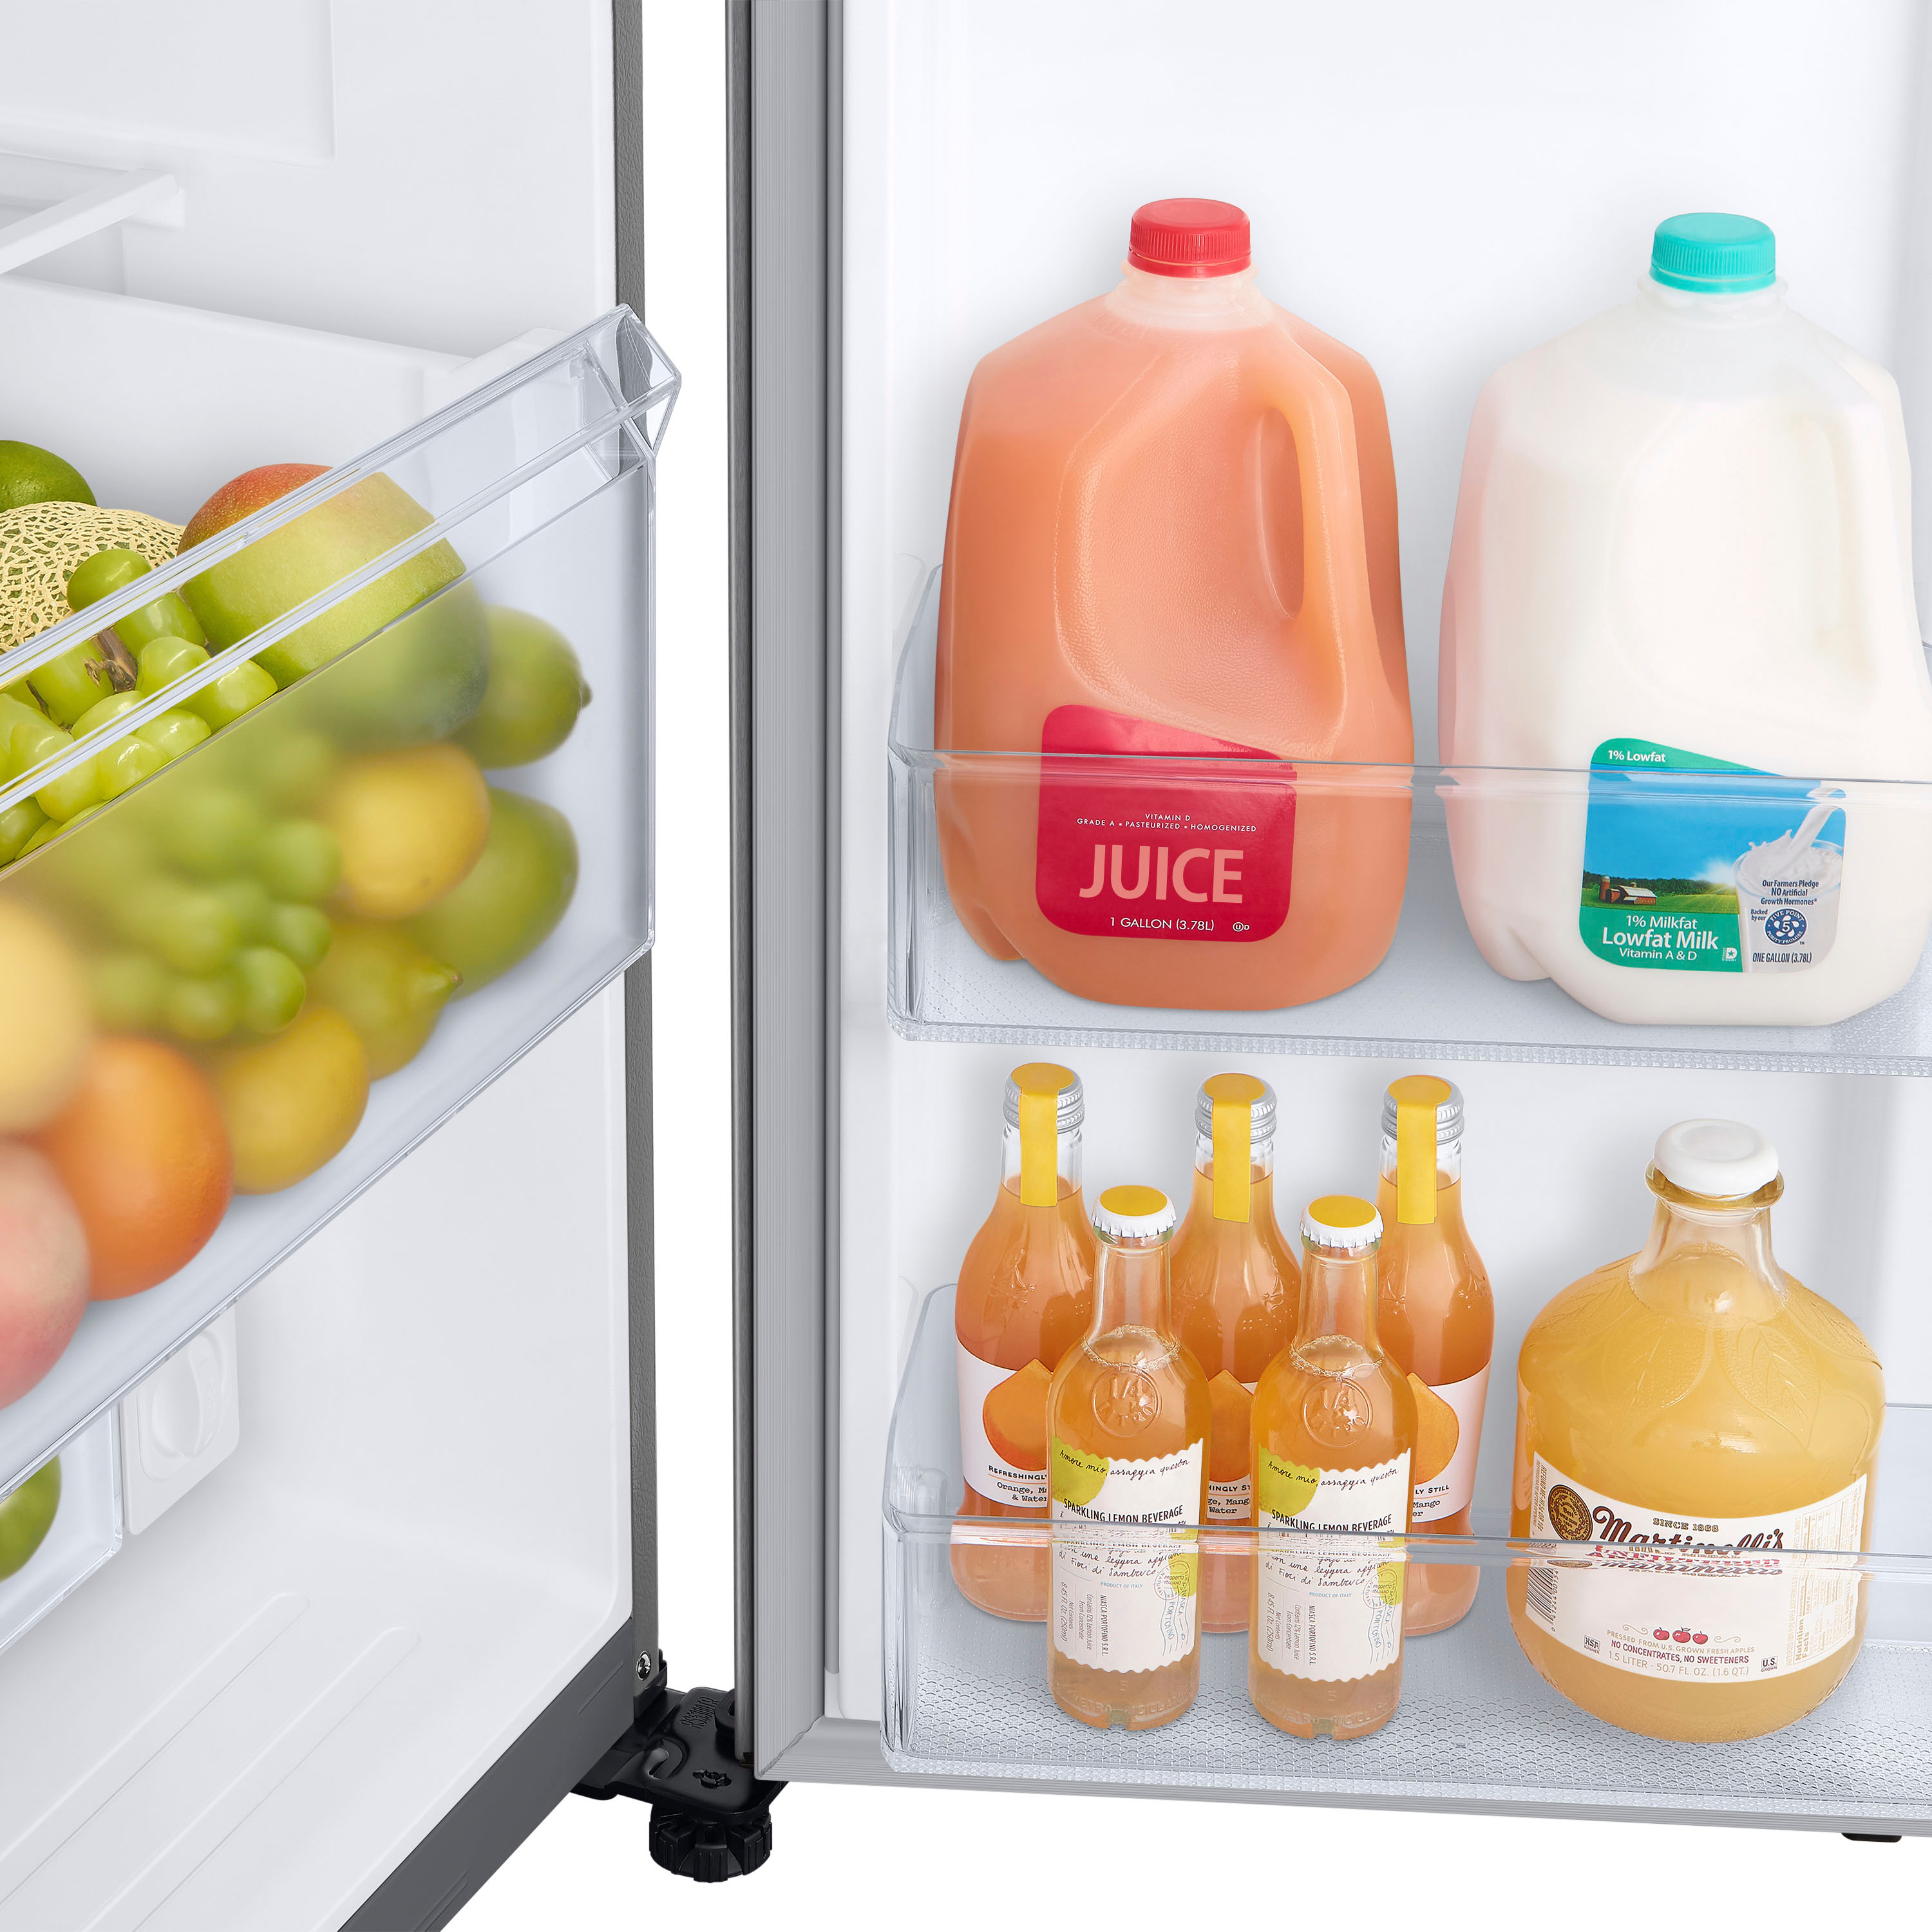 Food for thought: Should you buy a smart refrigerator